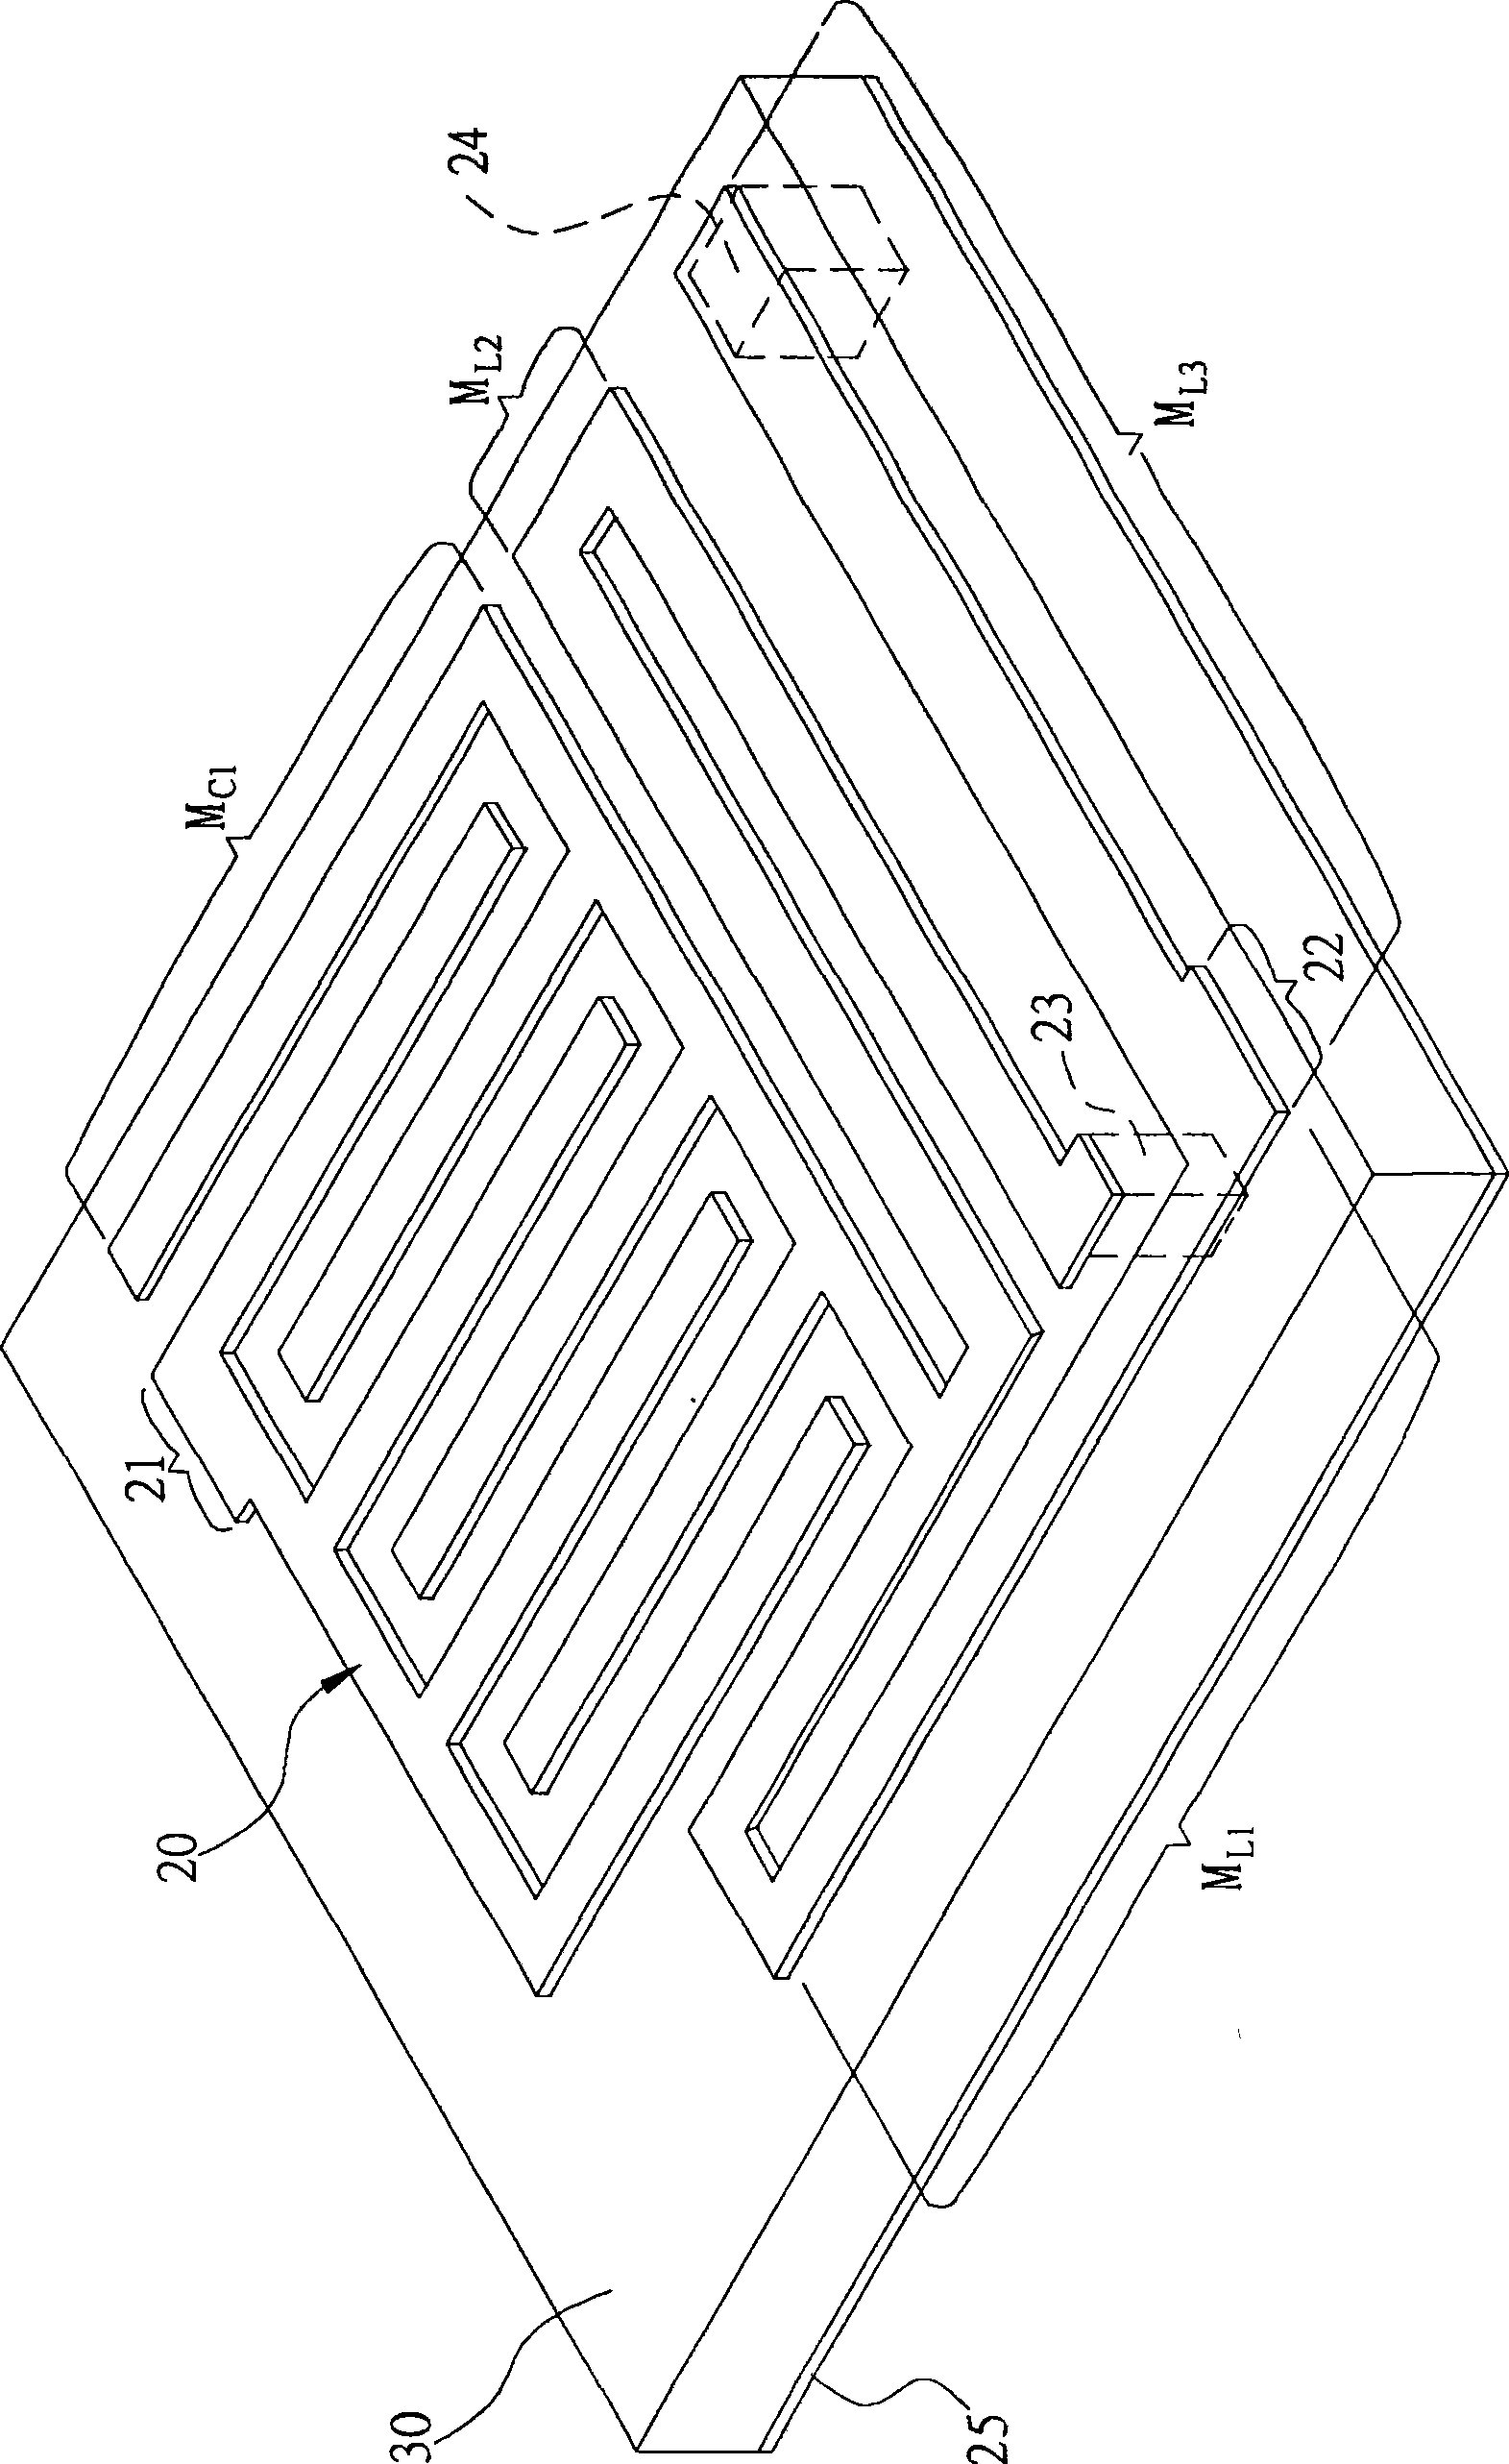 Narrow-frequency band filter on circuit board for inhibiting high-frequency harmonic wave